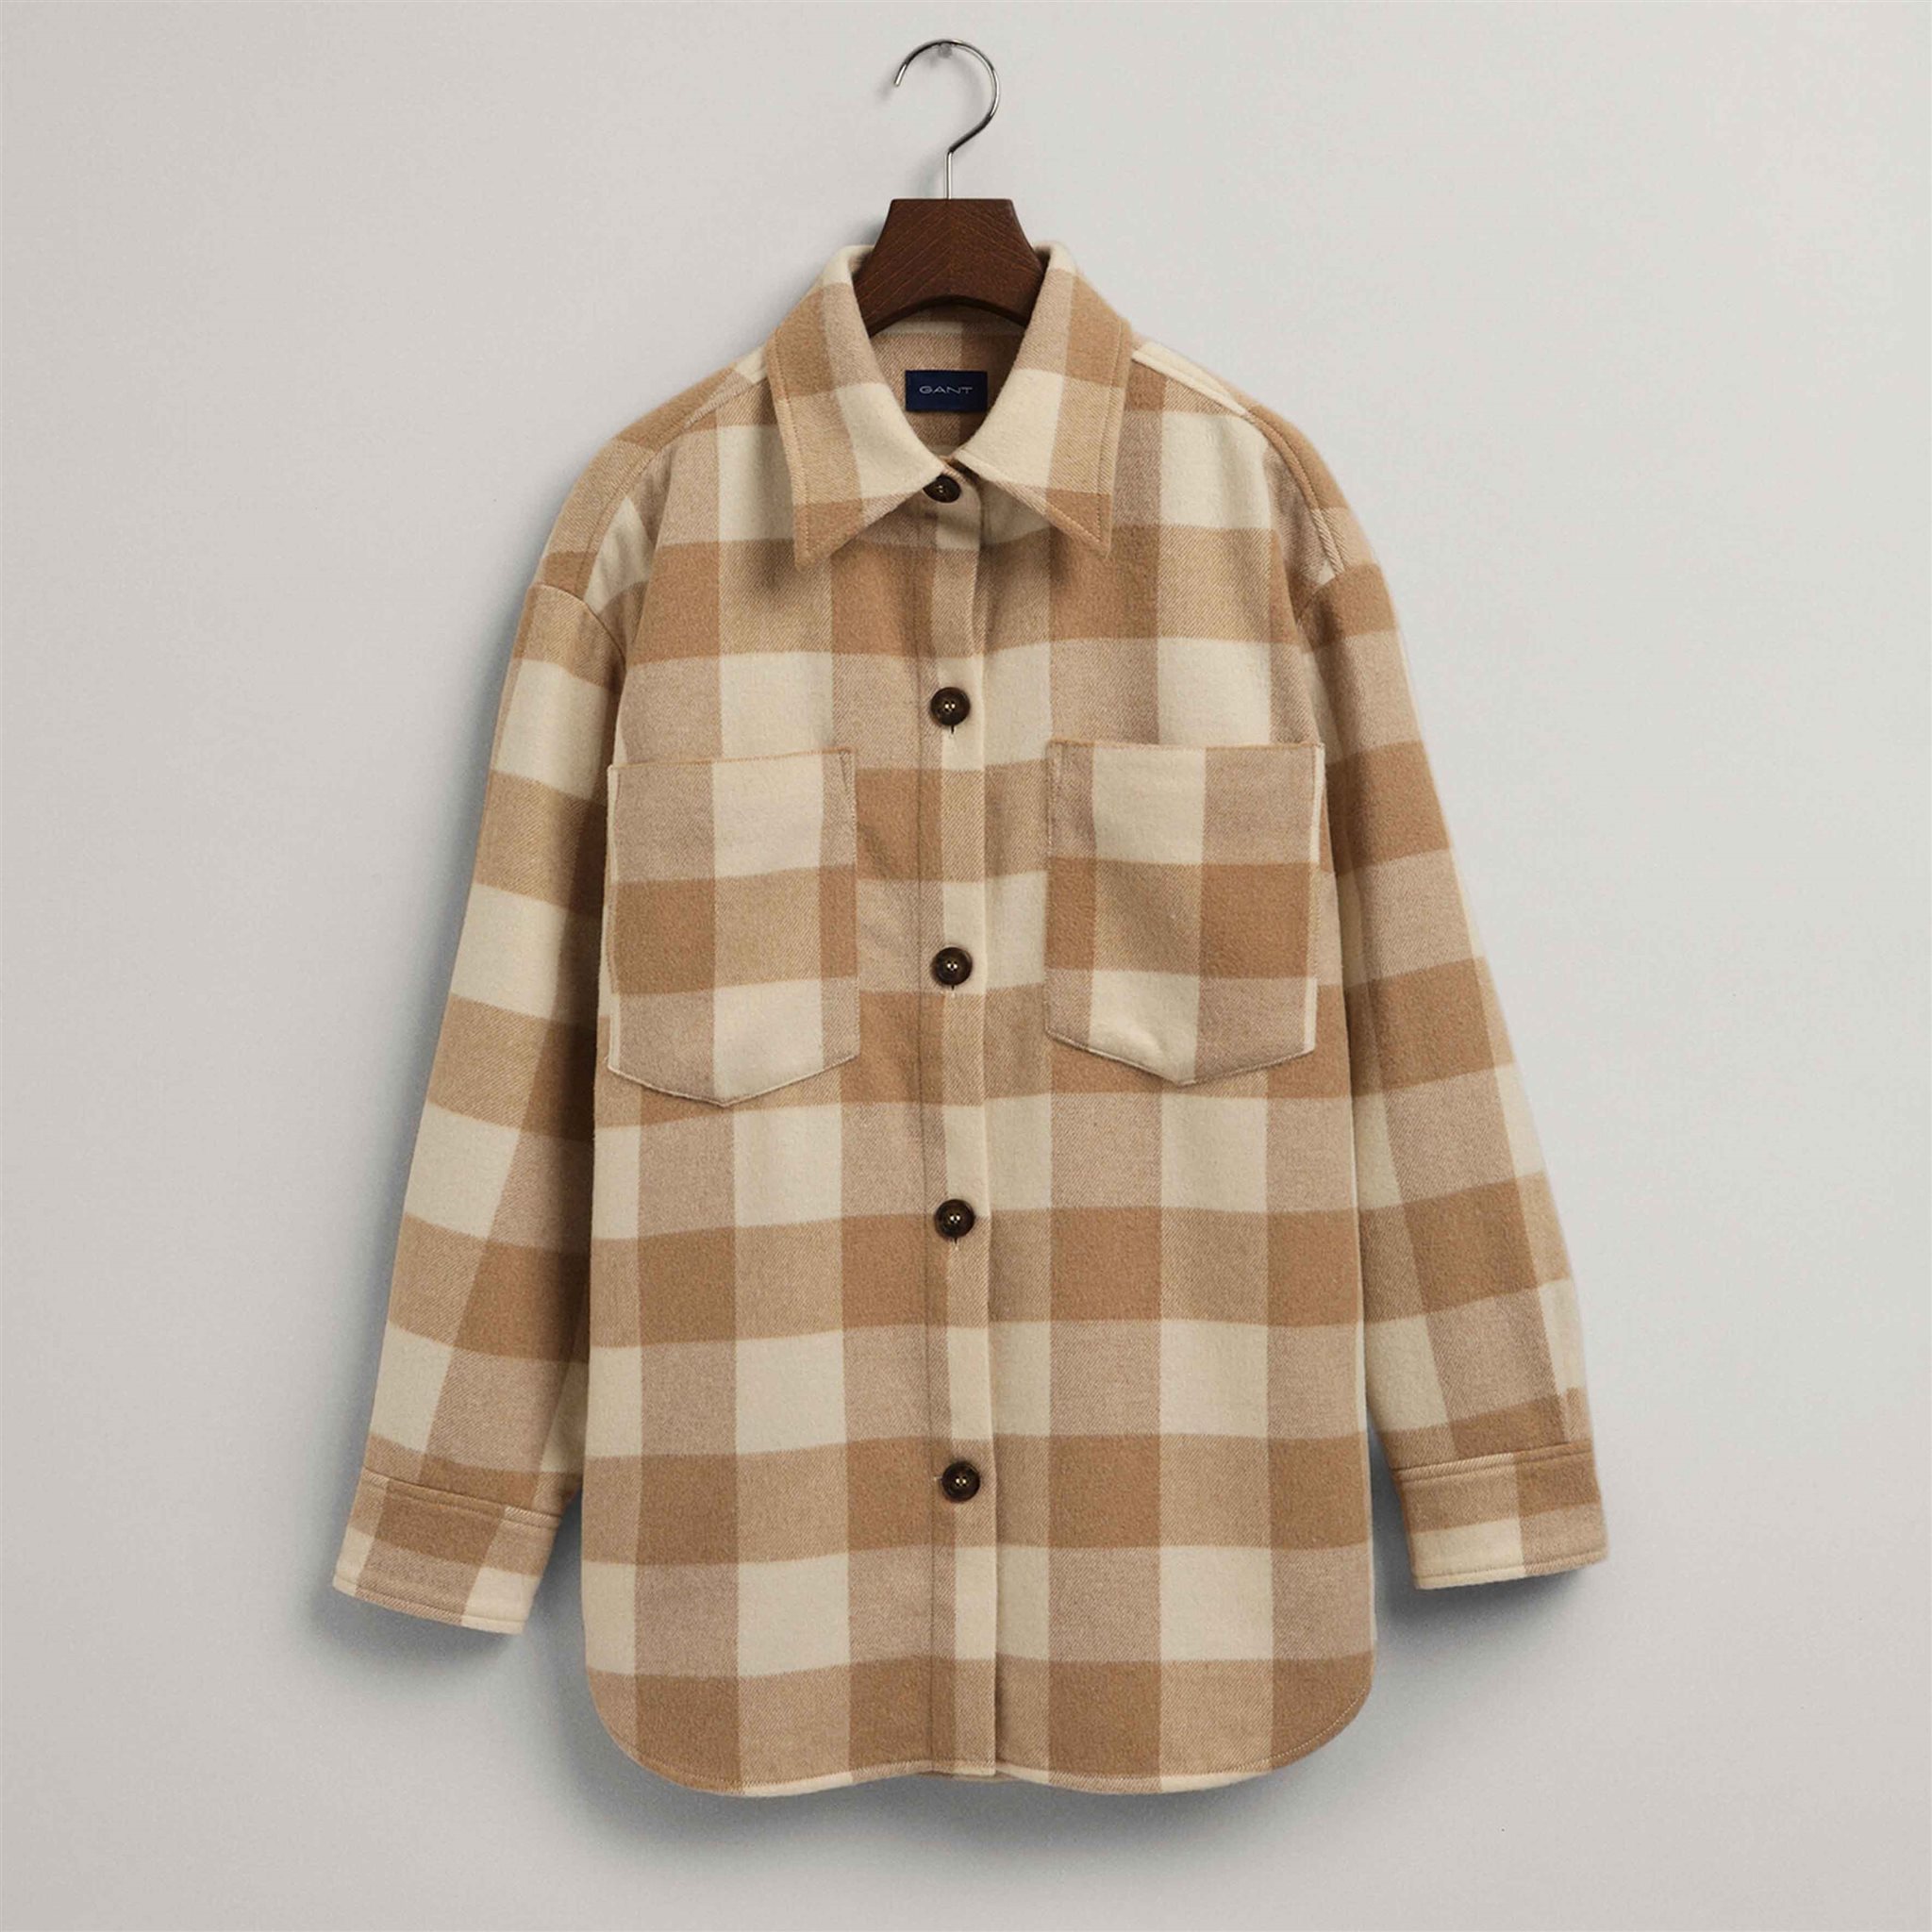 RELAXED CHECK OVERSHIRT GANT WOMAN